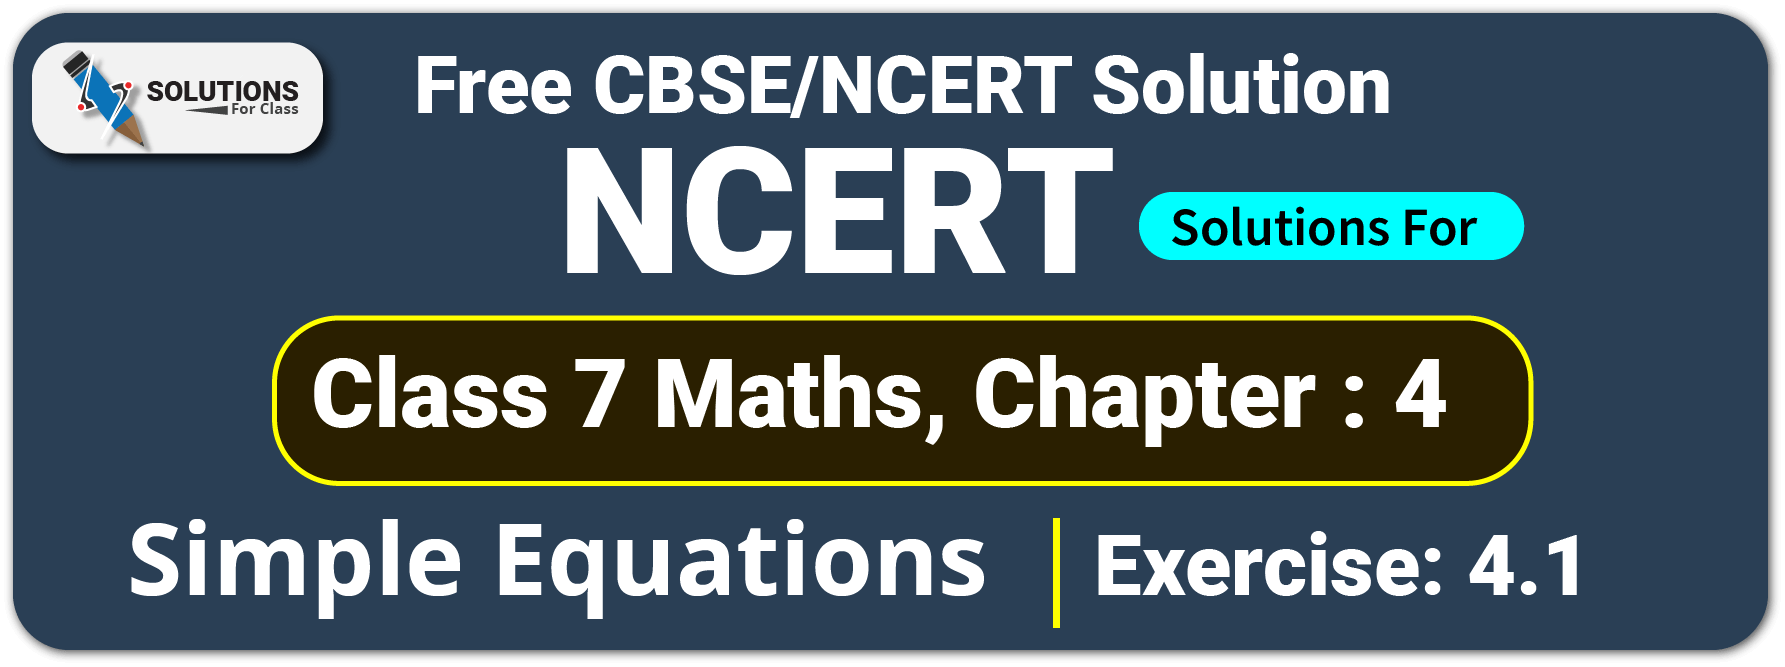 NCERT Solutions For Class 7 Maths Chapter 4, Simple Equations, Exercise 4.1